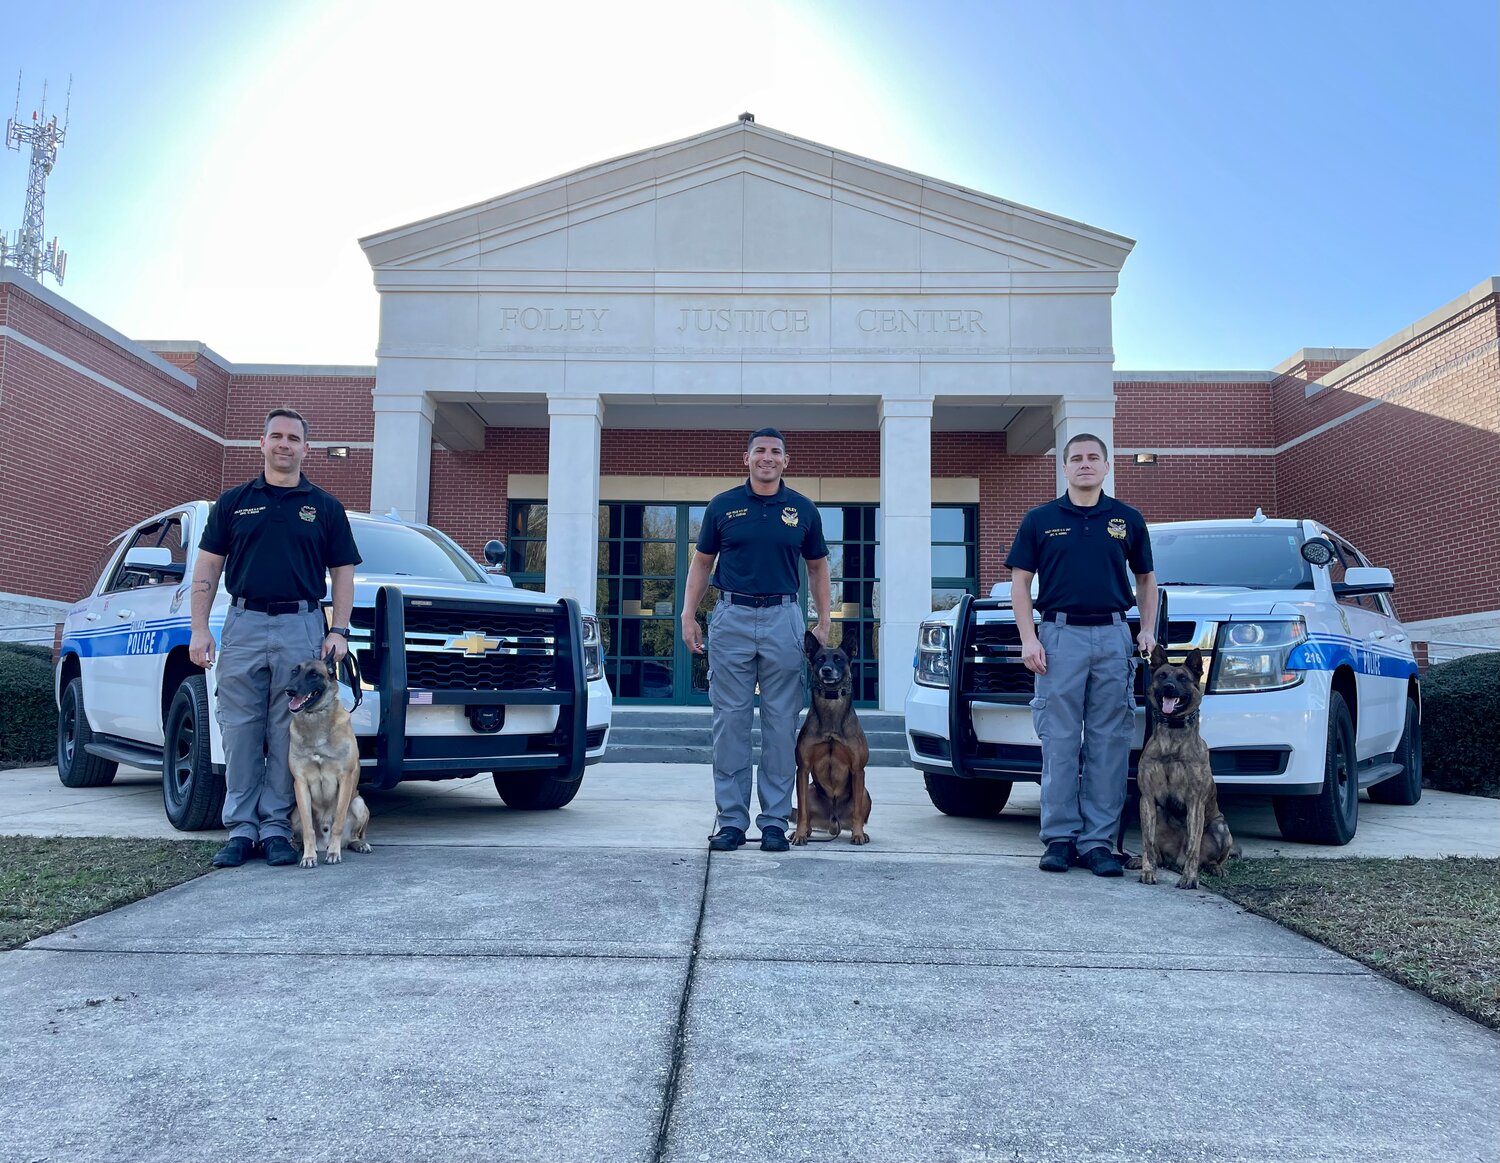 The 2023 United States Police Canine Association (USPCA) PD1 K-9 Nationals arrives in Foley Sept. 24-28 and will welcome more than 100 police K-9s and handlers. Three of Foley’s own K-9s and handlers will compete.